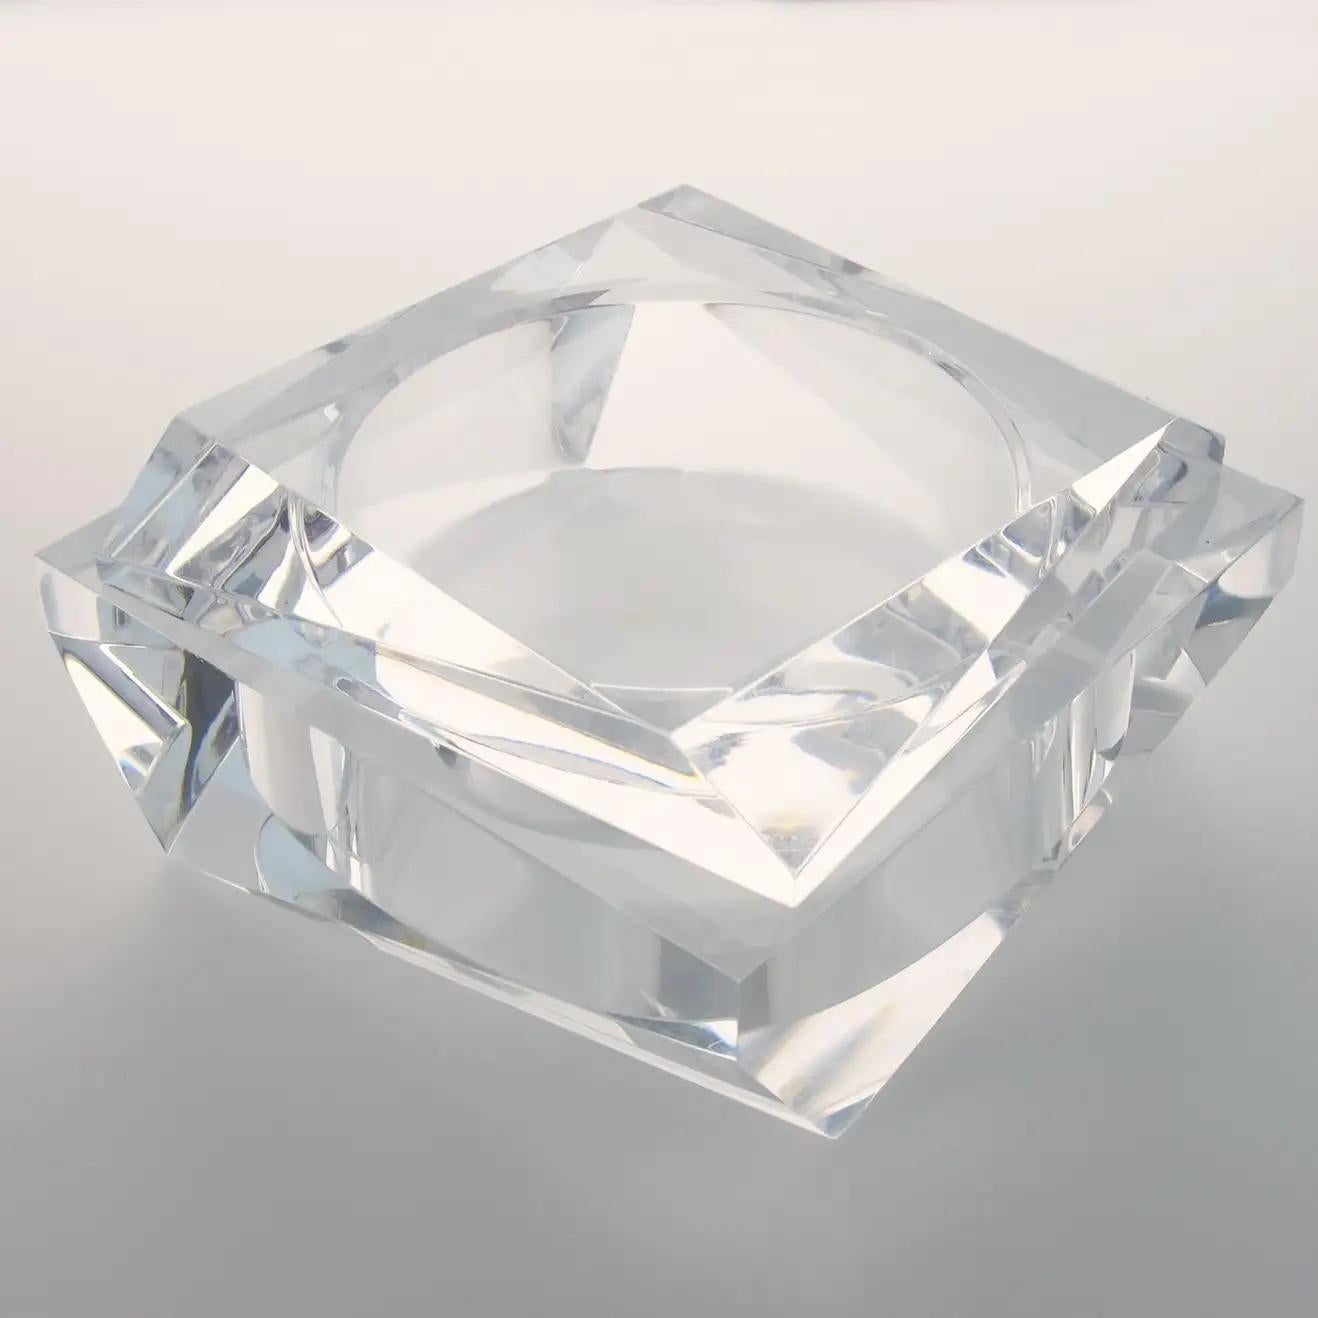 This stunning geometric Lucite decorative trinket-lidded box, made in the 1960s, features a modernist shape with an incredible carved prismatic design. The box is made of crystal clear Lucite with a thick material. It is marked underside: 